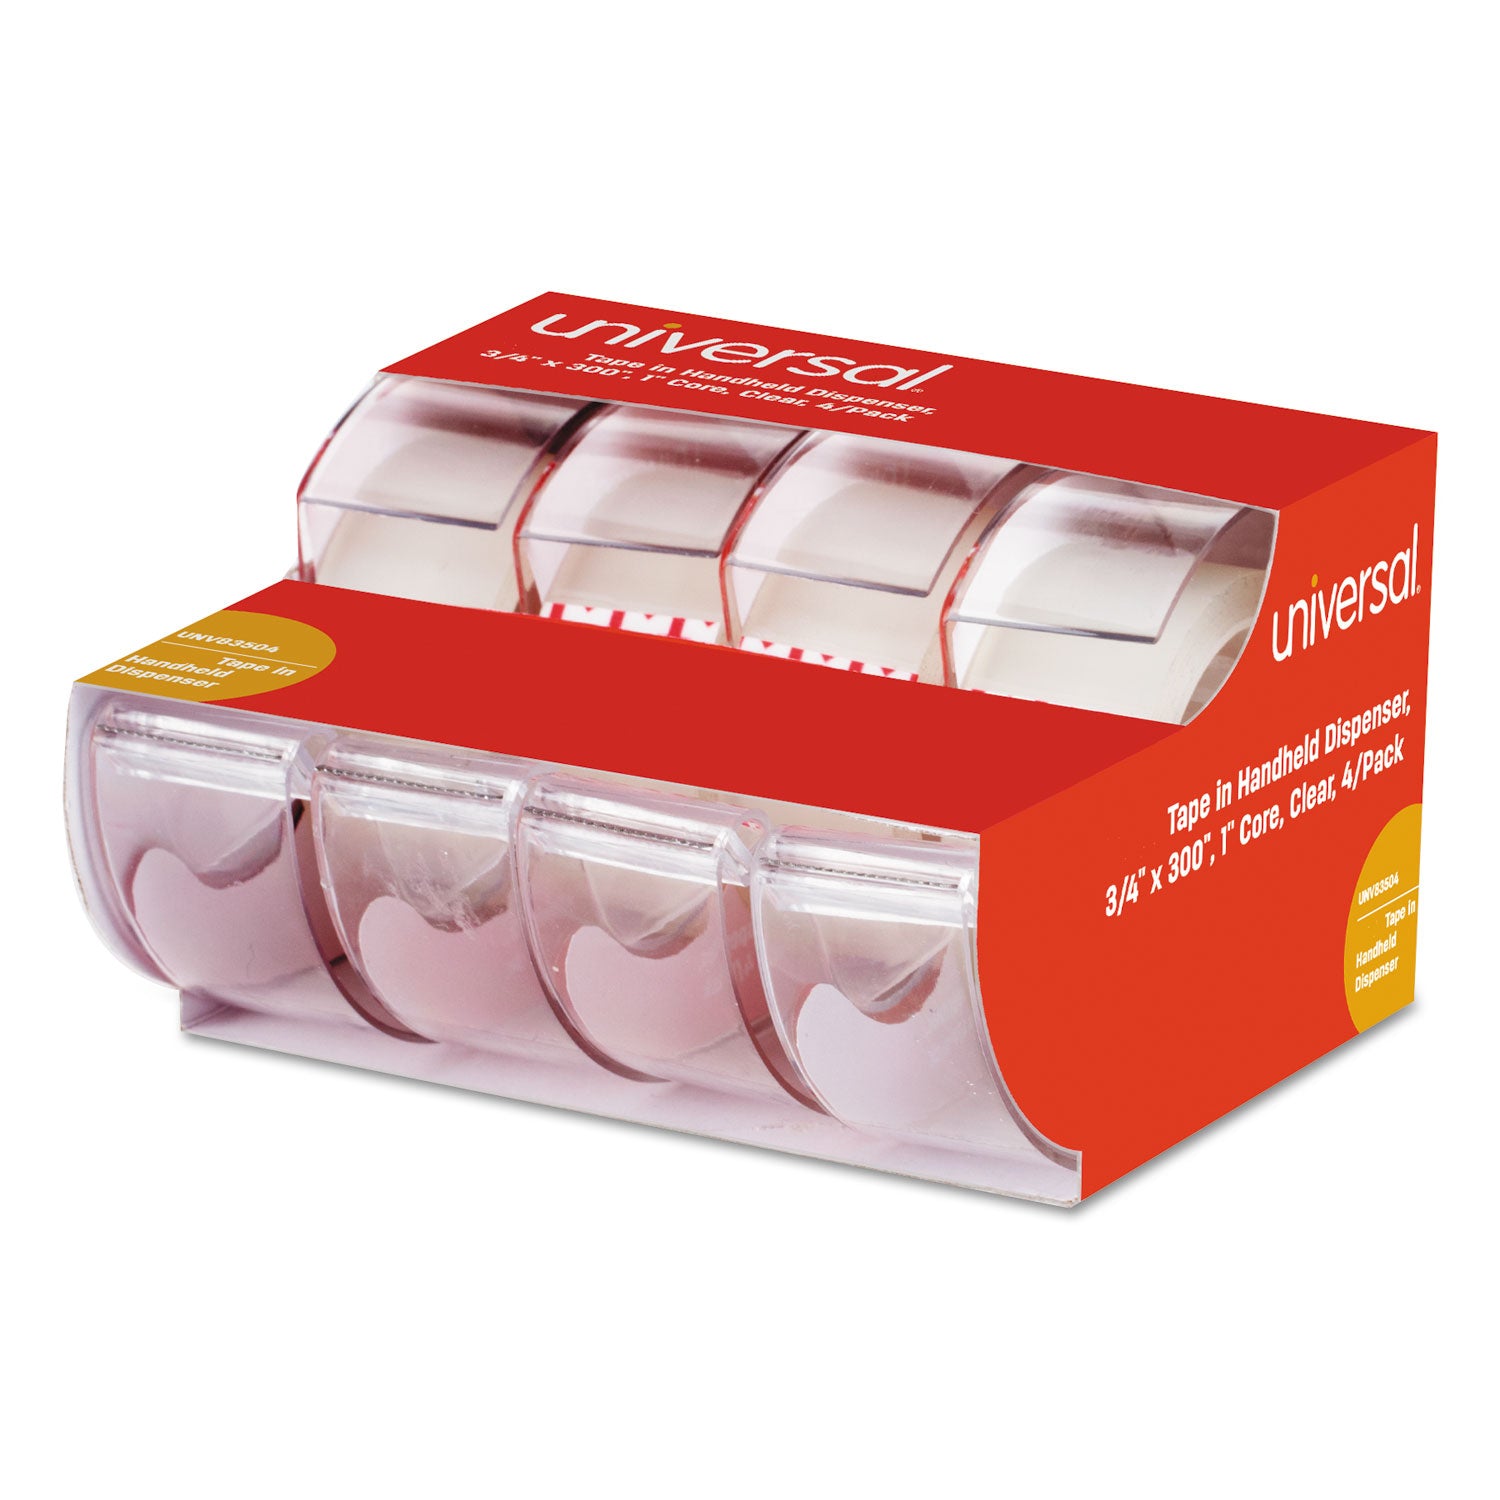 invisible-tape-with-handheld-dispenser-1-core-075-x-25-ft-clear-4-pack_unv83504 - 2